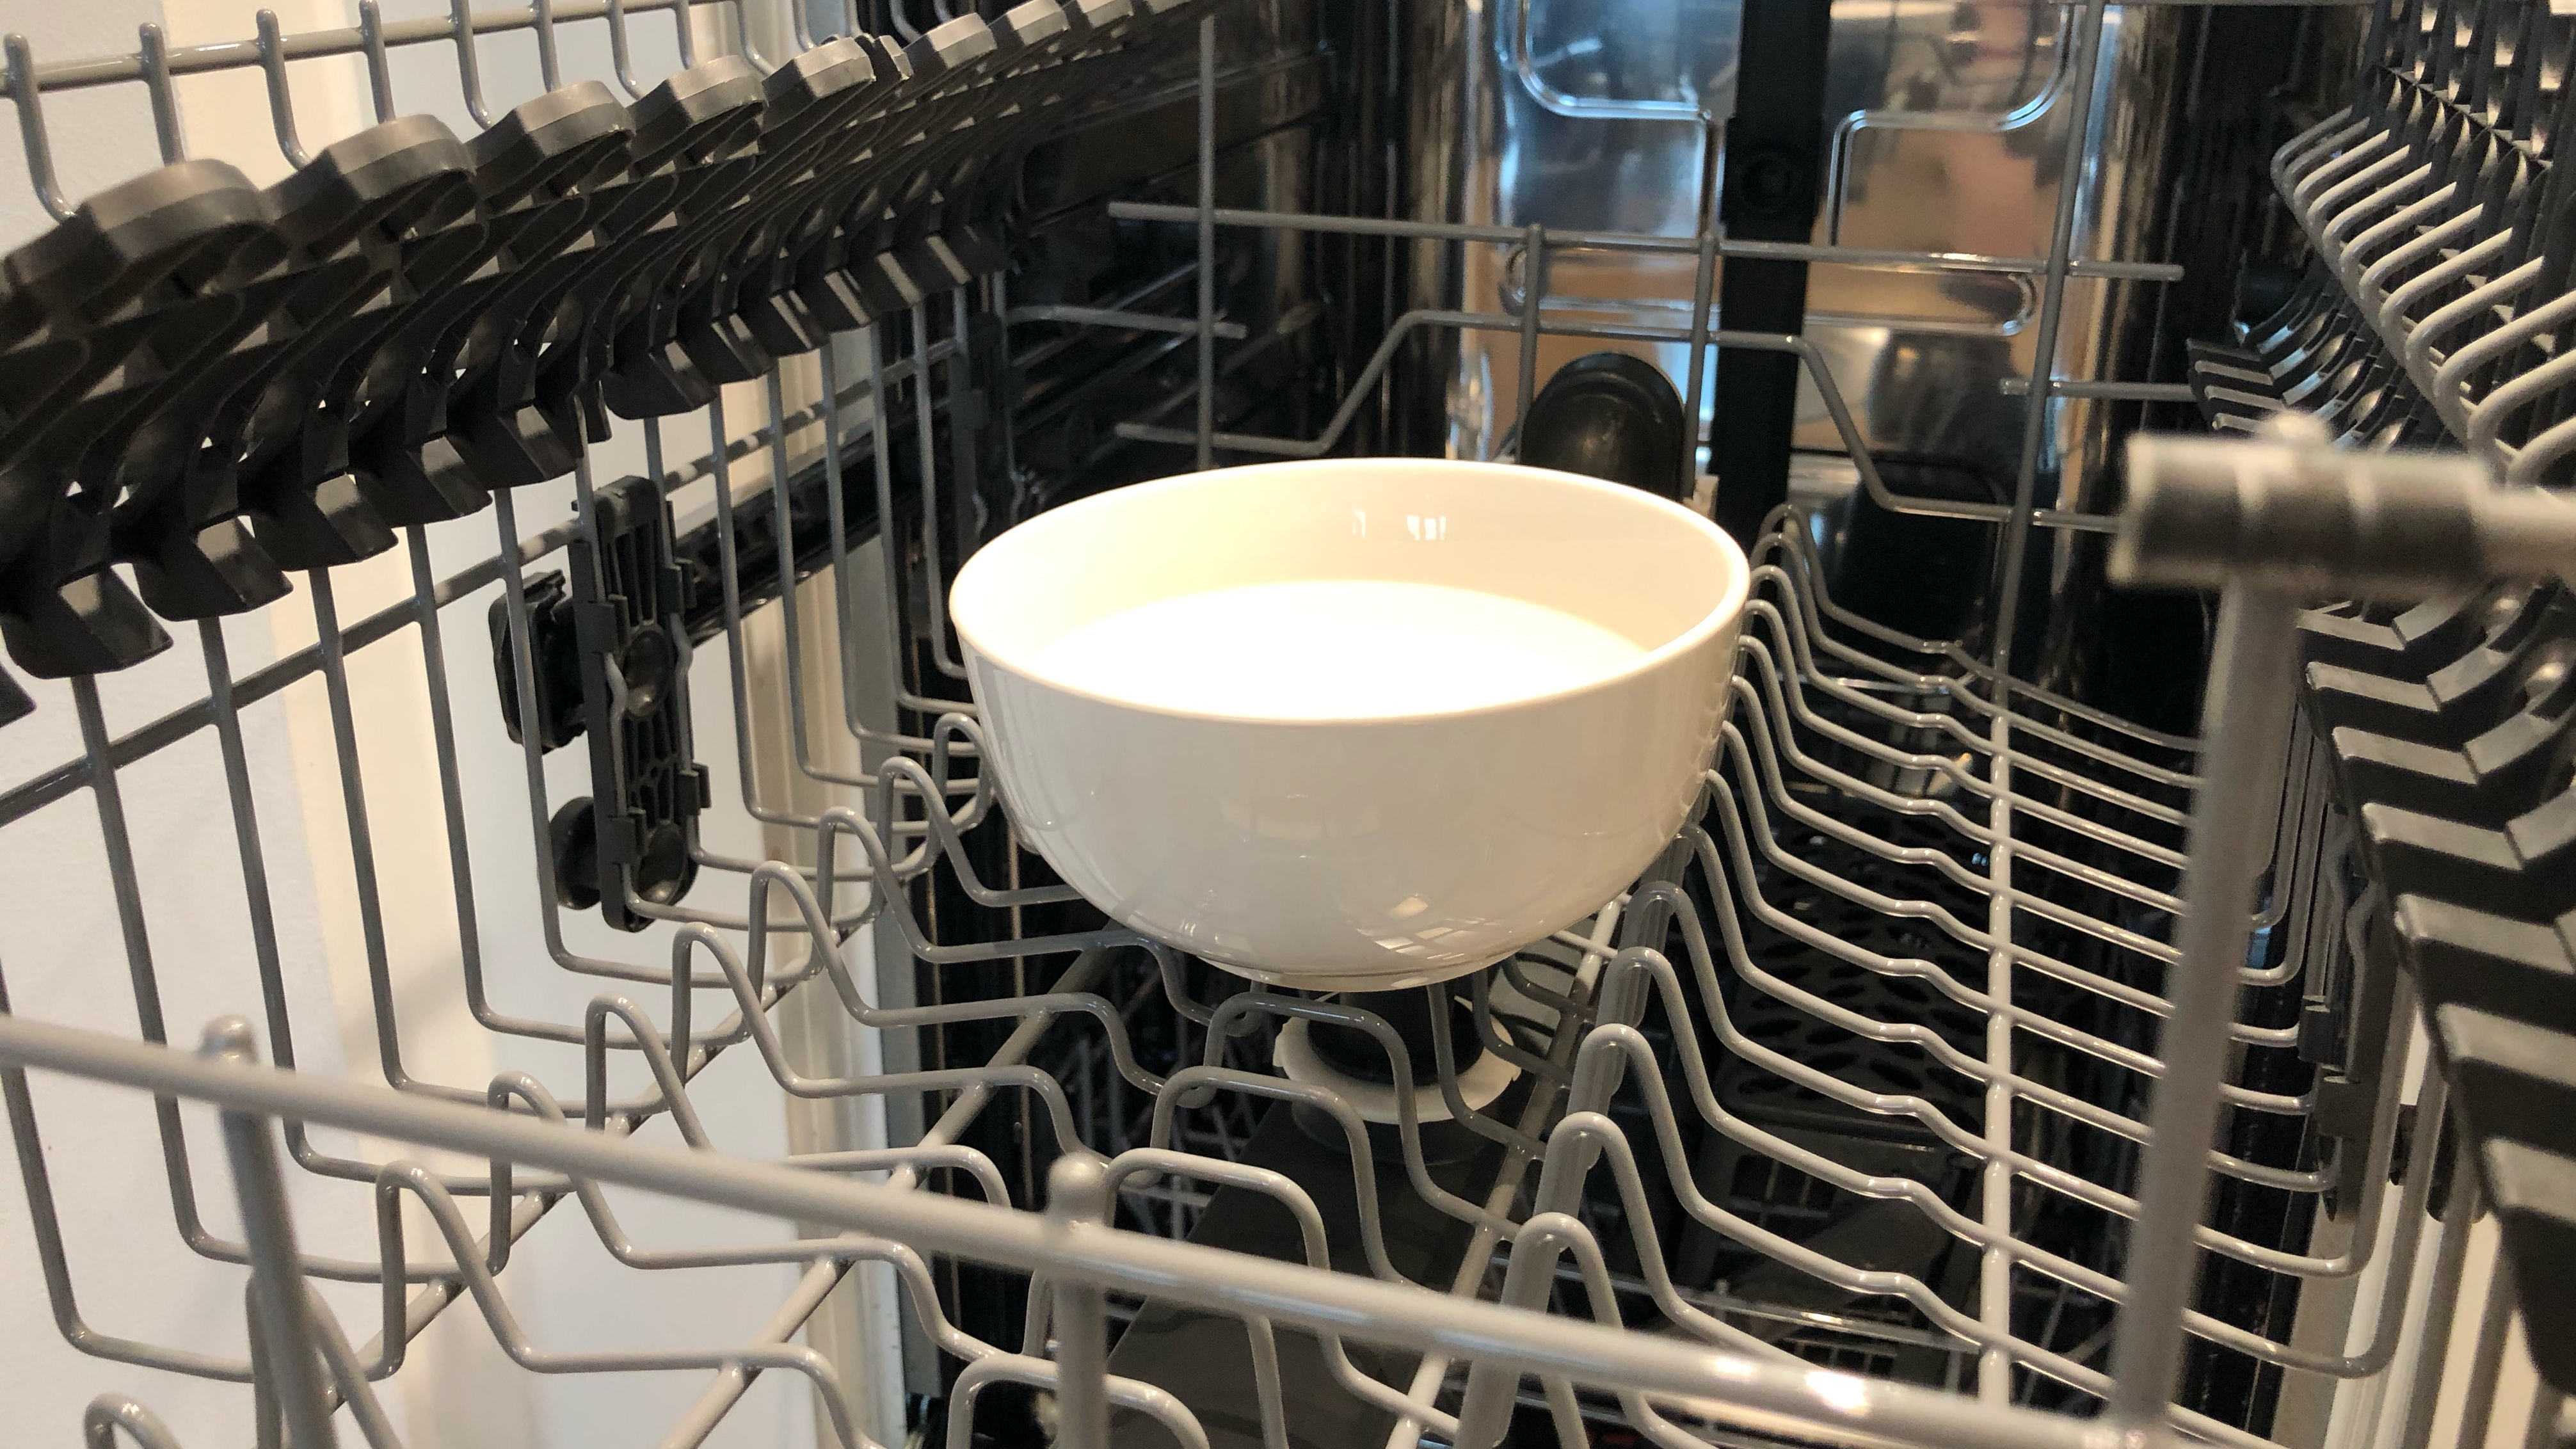 A bowl of vinegar situated on the top rack of a dishwasher to clean the dishwasher of limescale